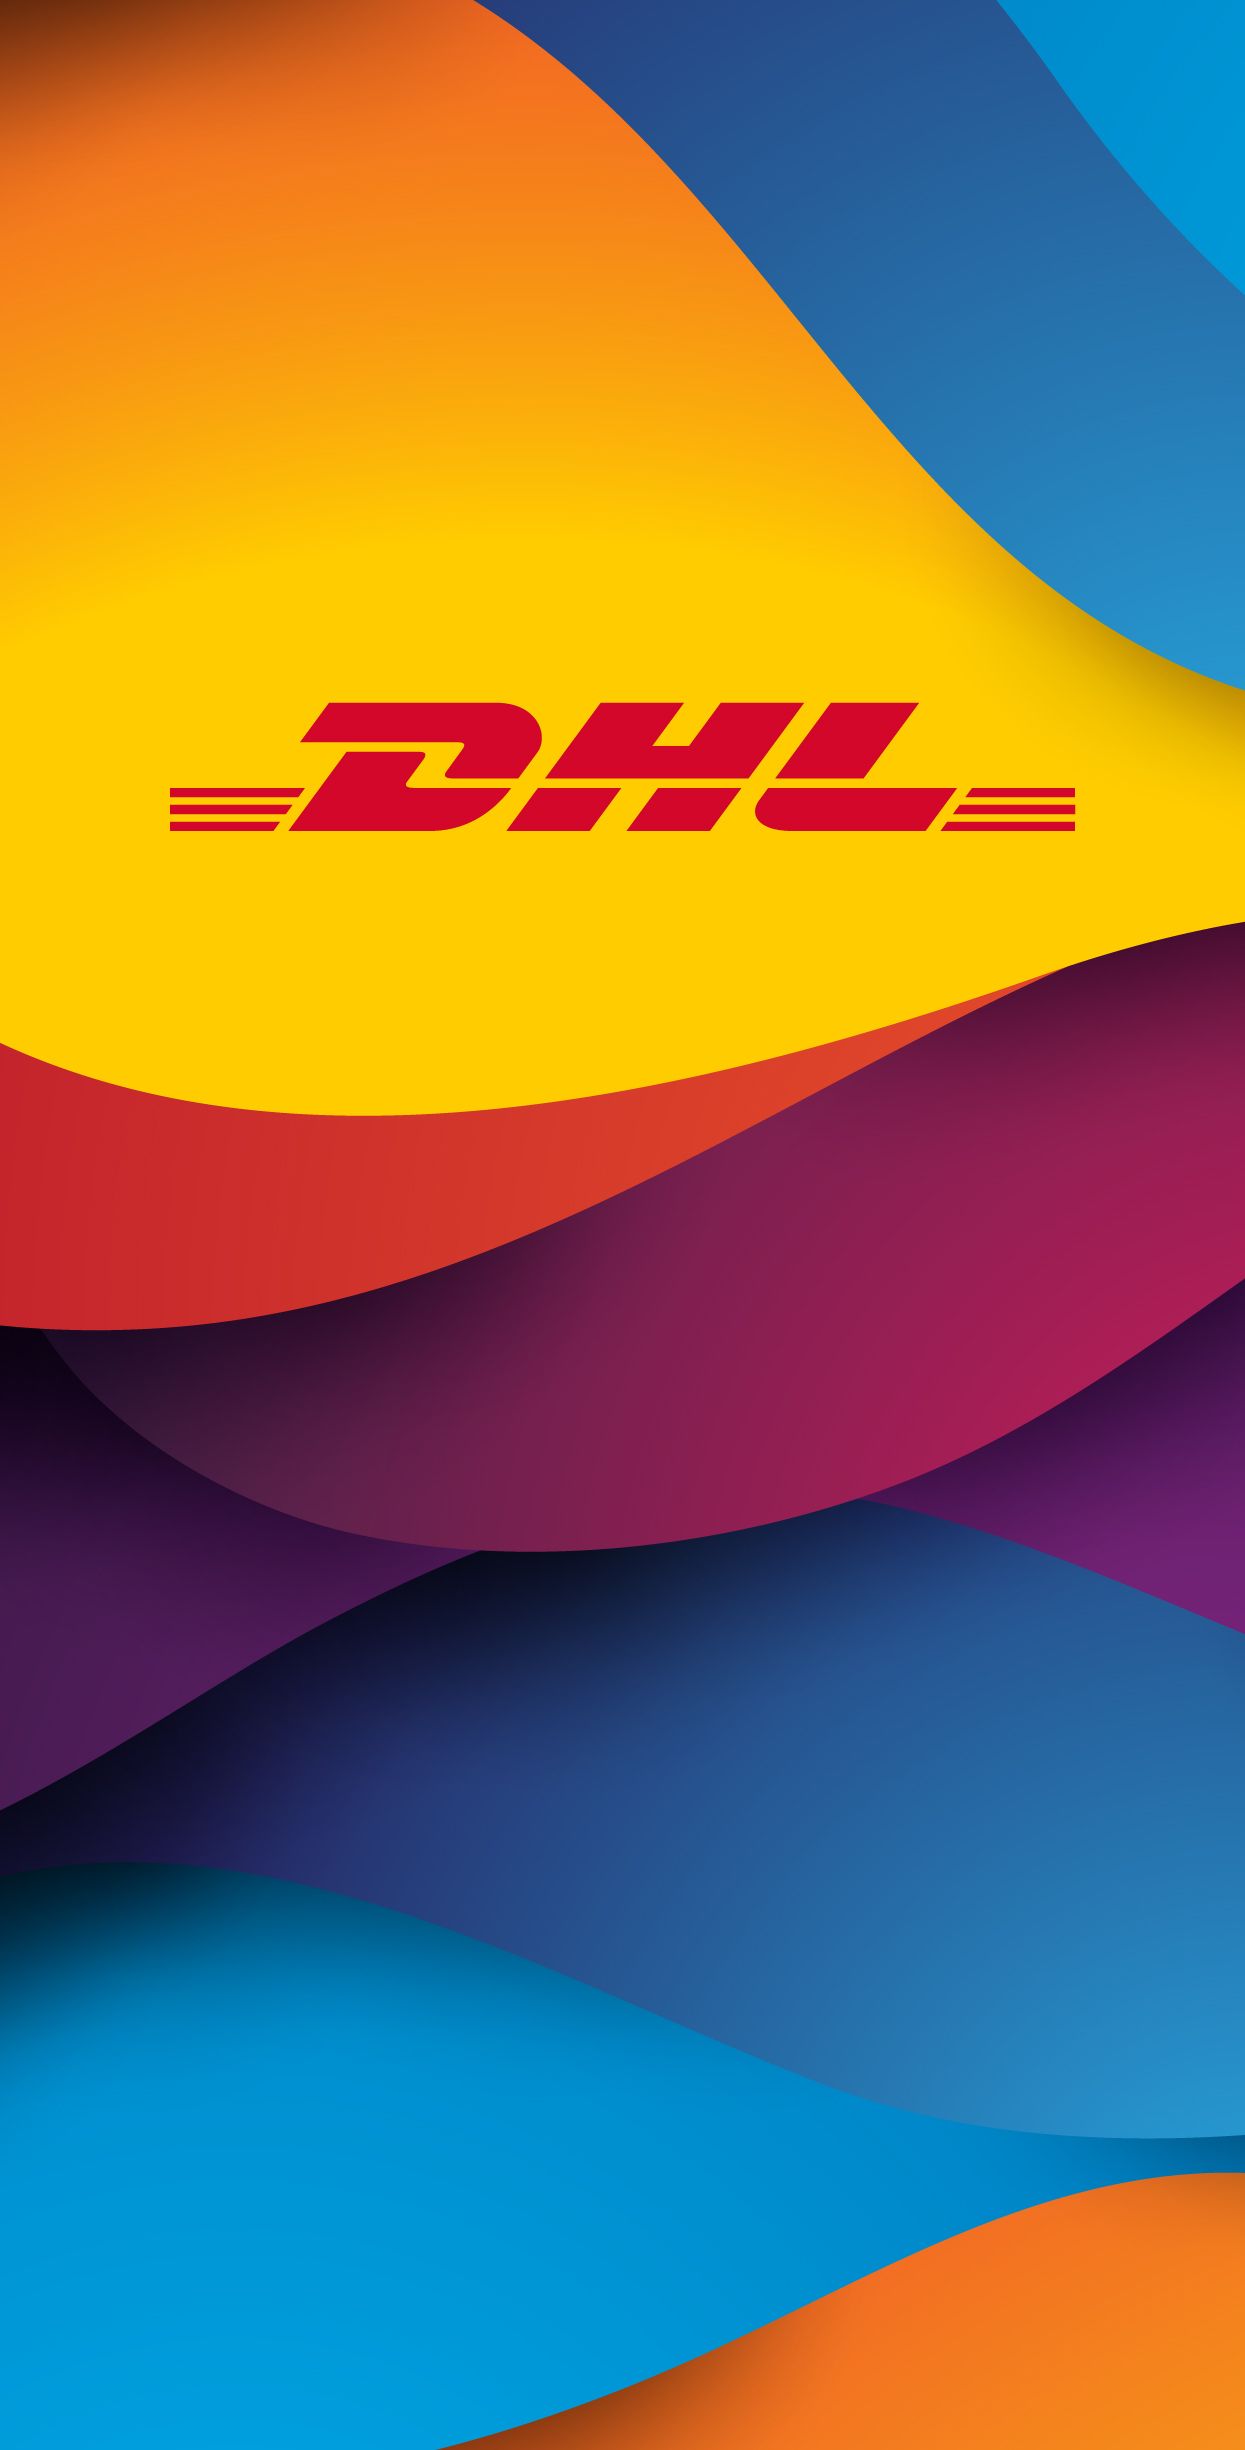 Äç dhl express irelandïfor all you dhl fans out there you can now rock that yellowandred all day every day check out our slick new dhl phone wallpapers dhl speedofyellow dhlexpress